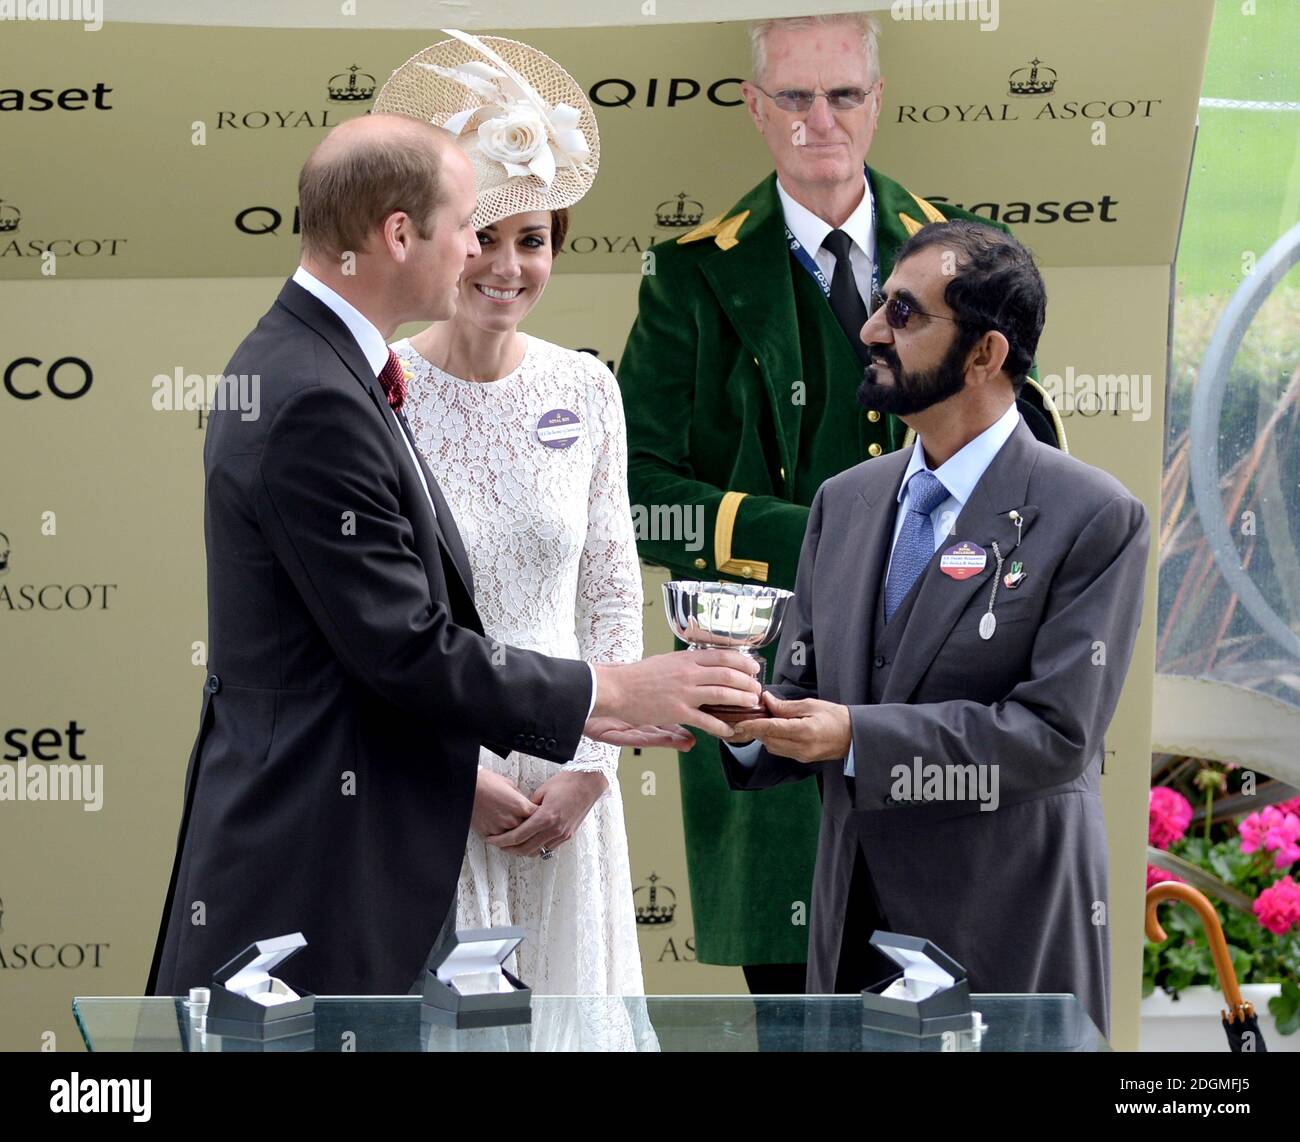 The Duke and Duchess of Cambridge present owner Mohammed bin Rashid Al Maktoum with the trophy after his horse Usherette won the Duke of Cambridge Stakes during day two of Royal Ascot 2016, at Ascot Racecourse. Stock Photo